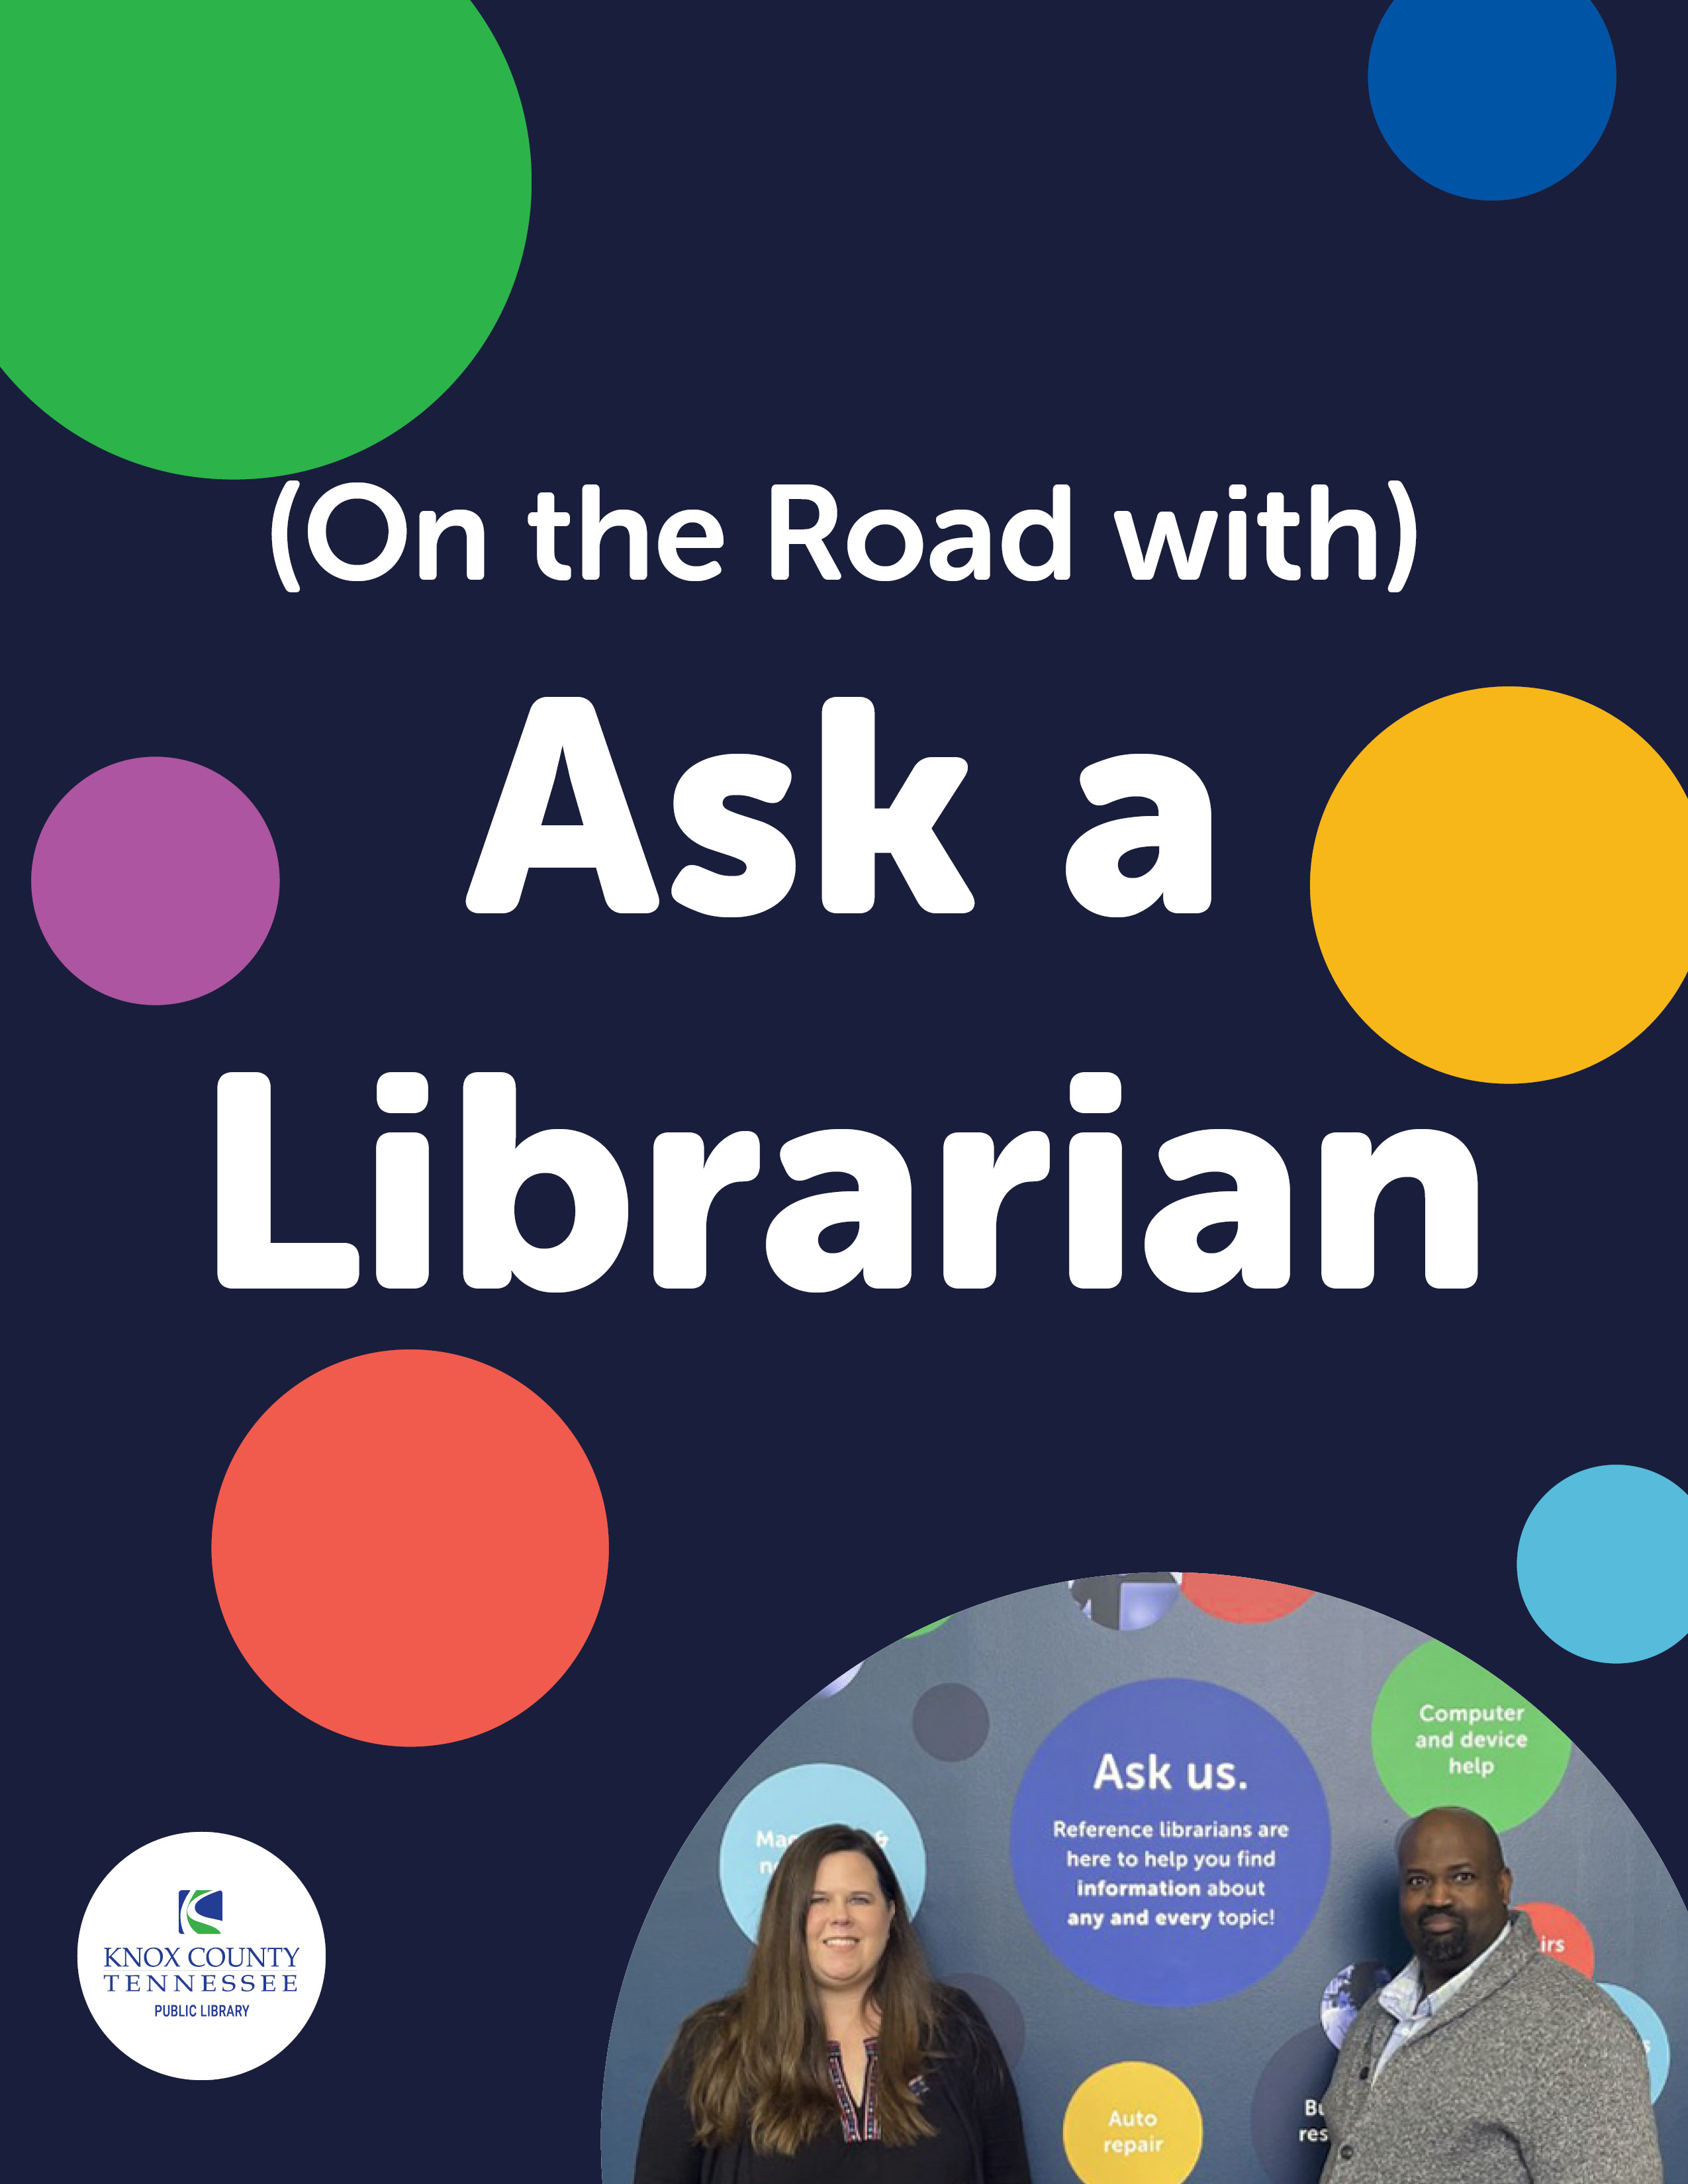 On the Road with Ask a Librarian